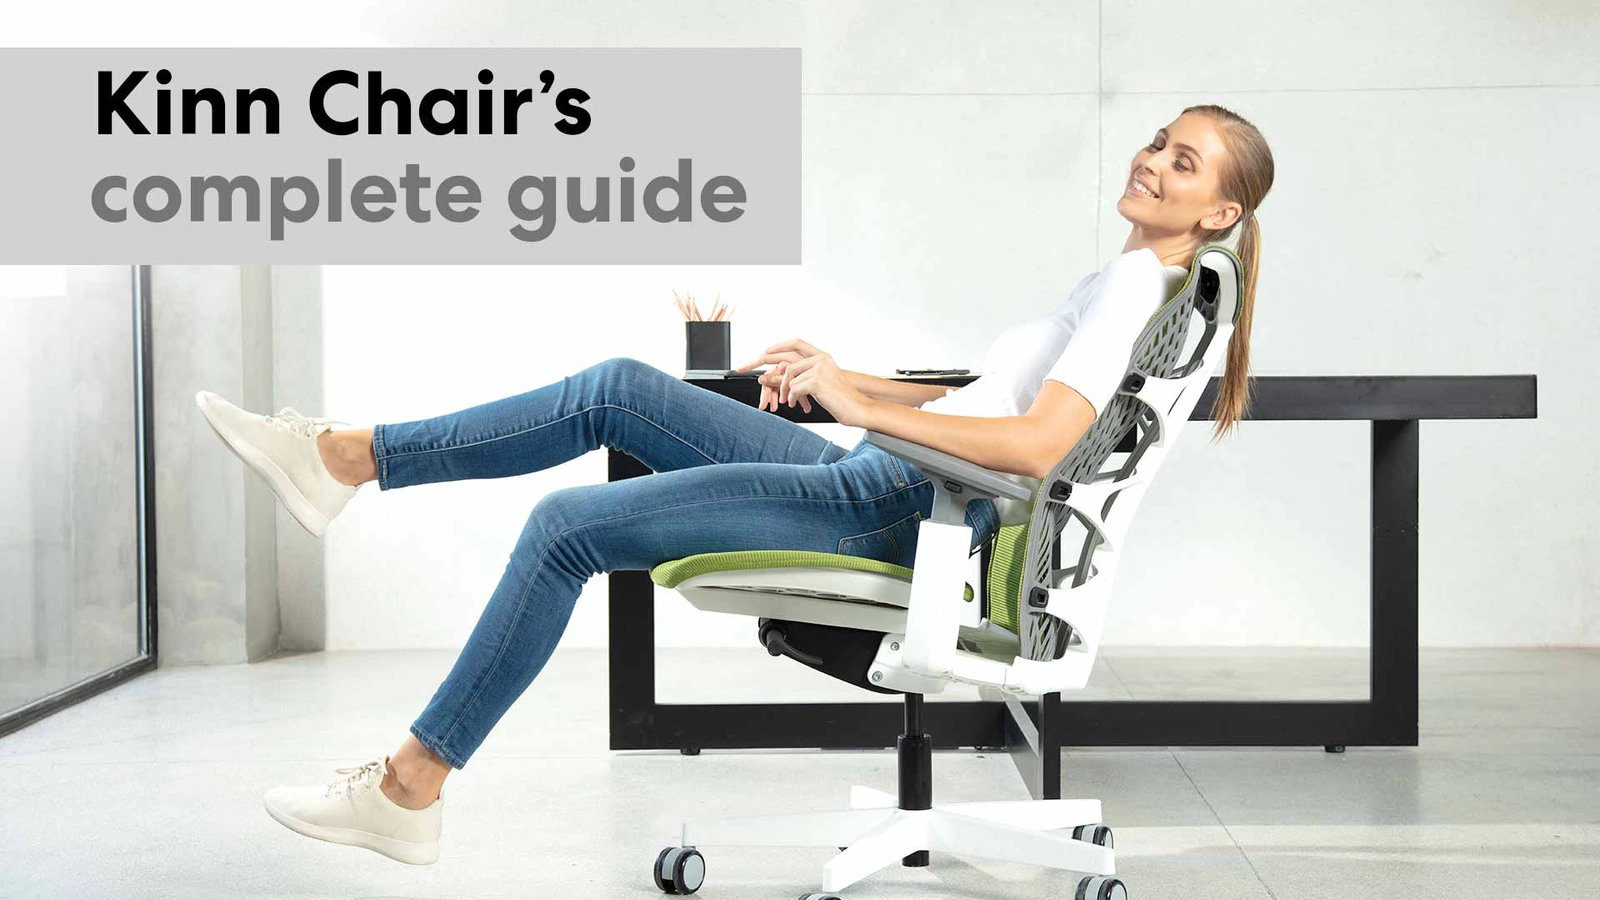 How to Use Your New ErgoChair Plus (Full Features Guide)